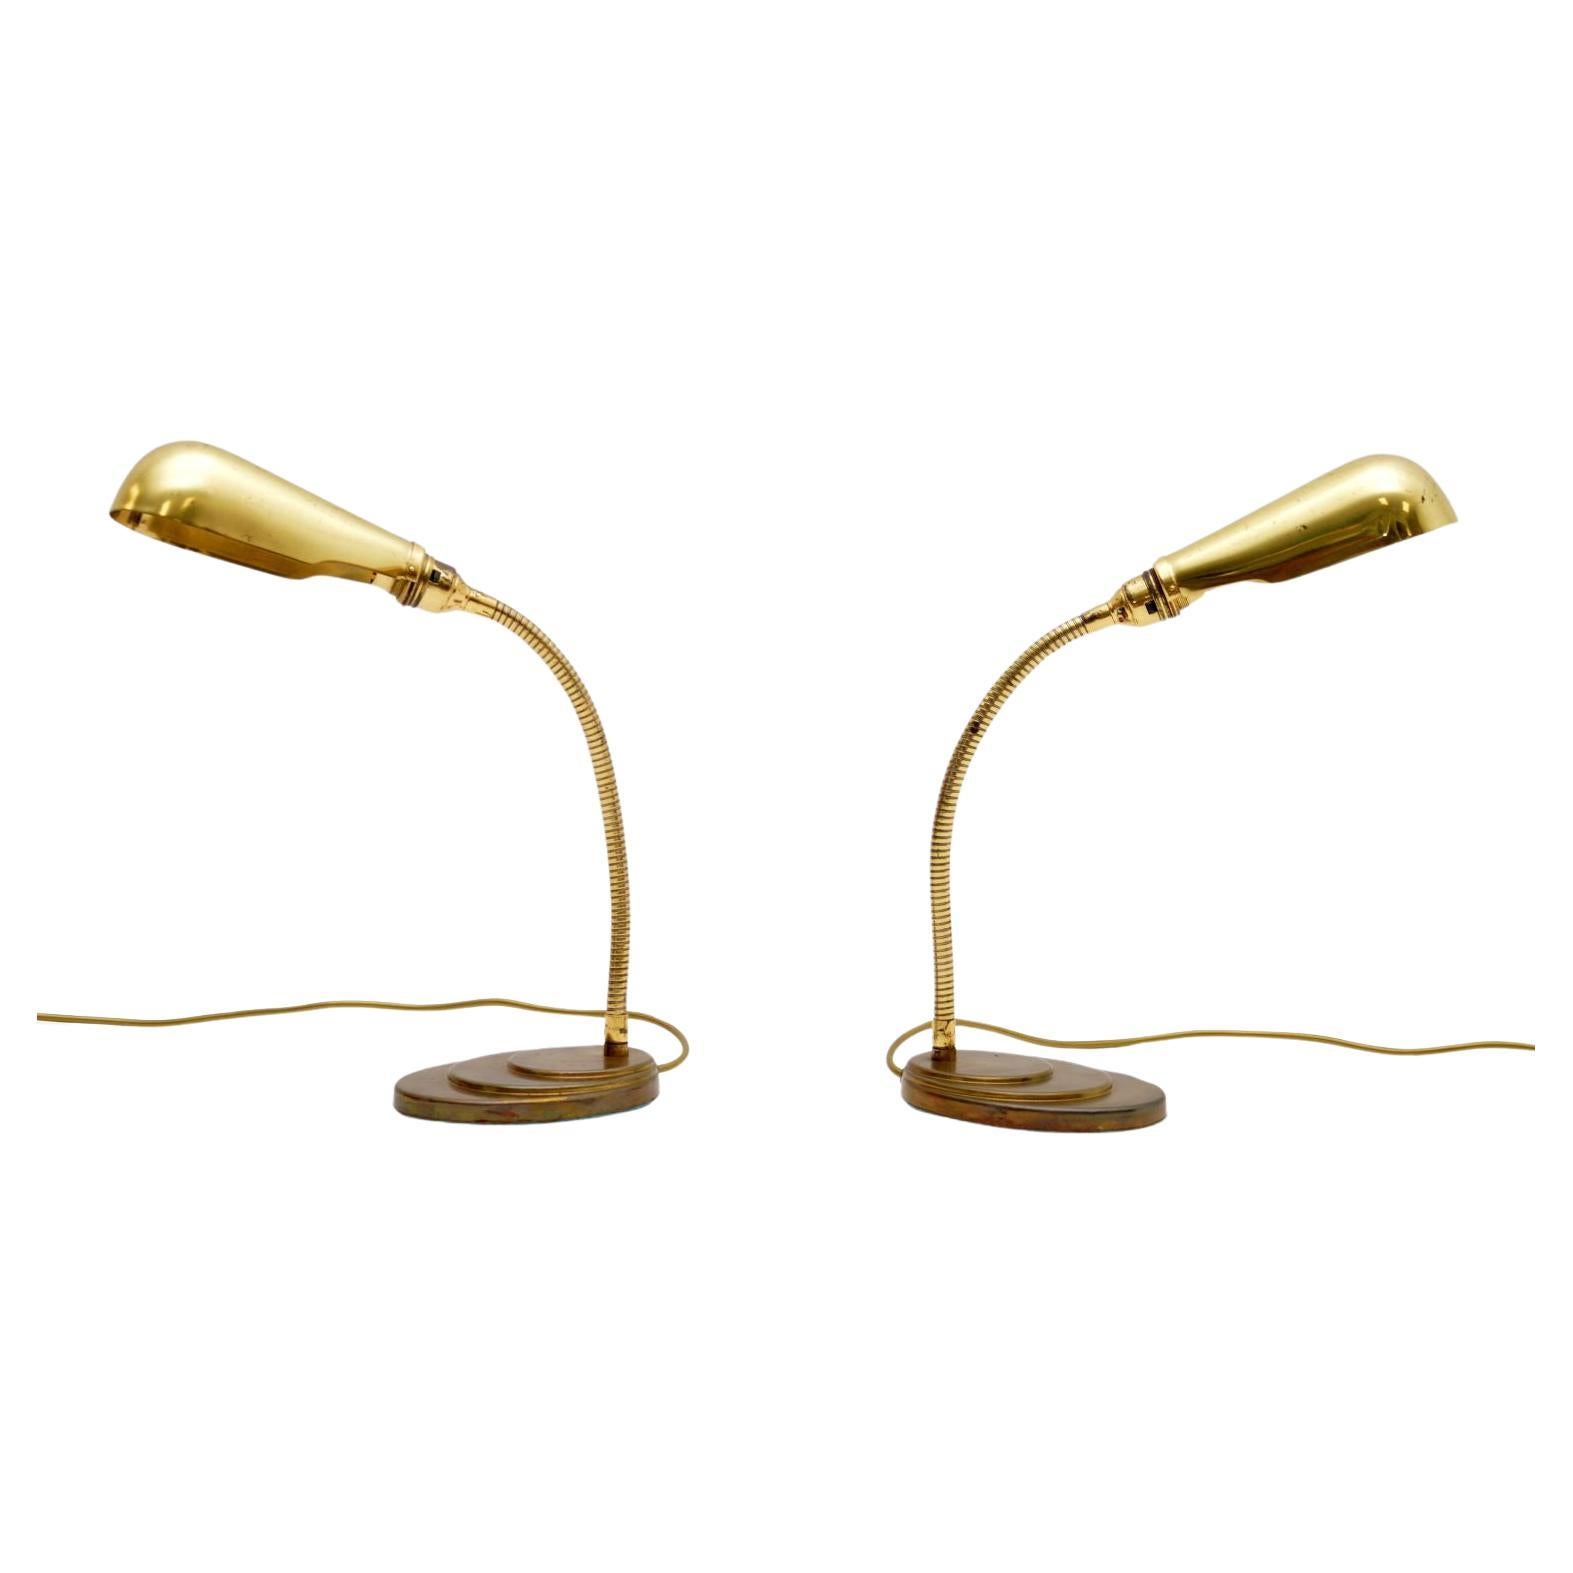 1960’s Pair of Vintage Brass Desk / Table Lamps For Sale